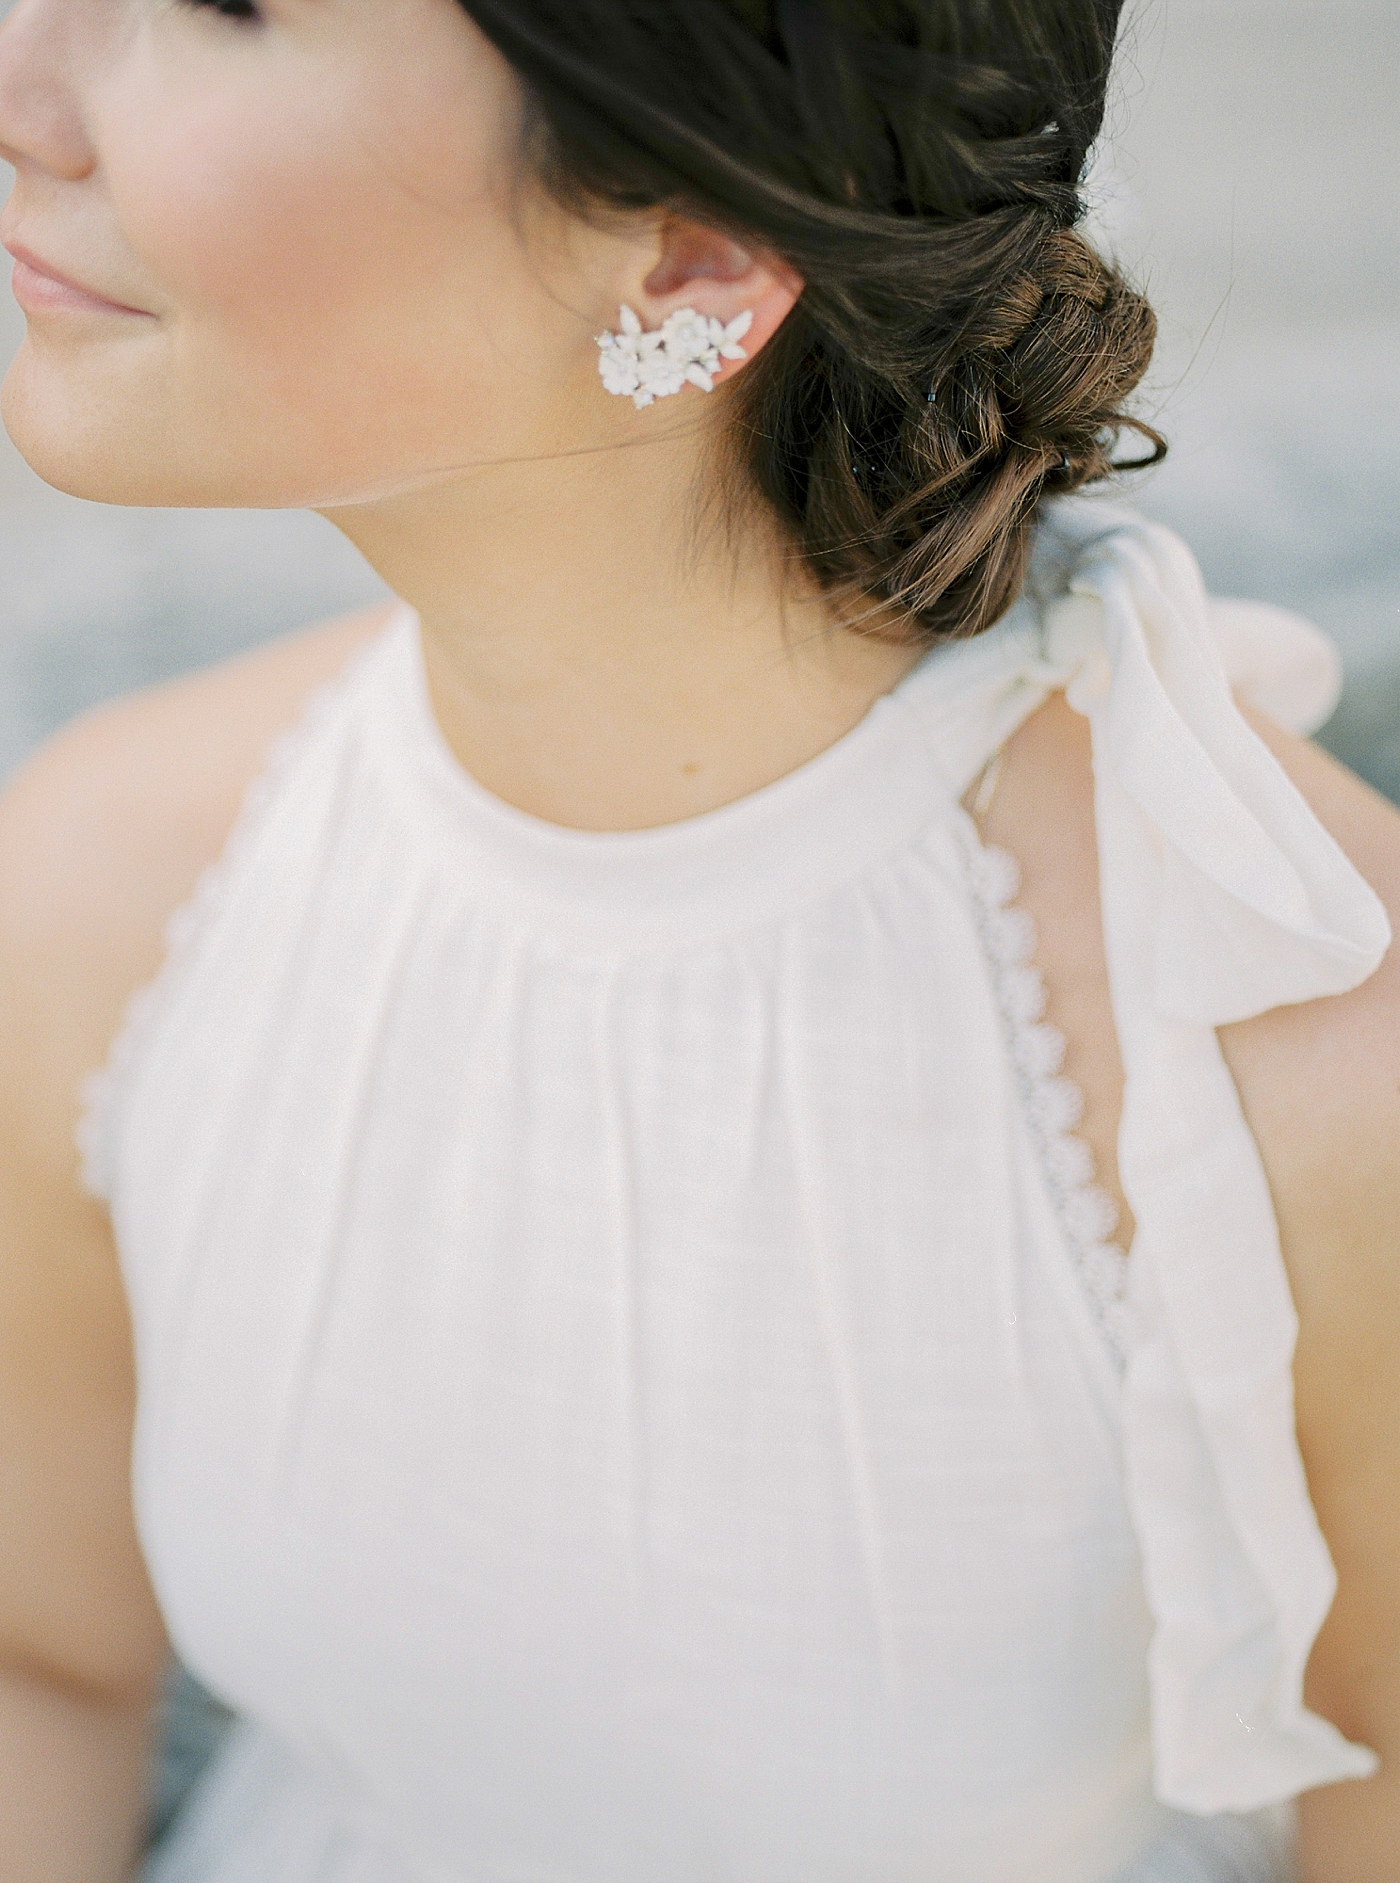 Detail of bride's earring and hair in an updo | Photo by Diane Sotero 